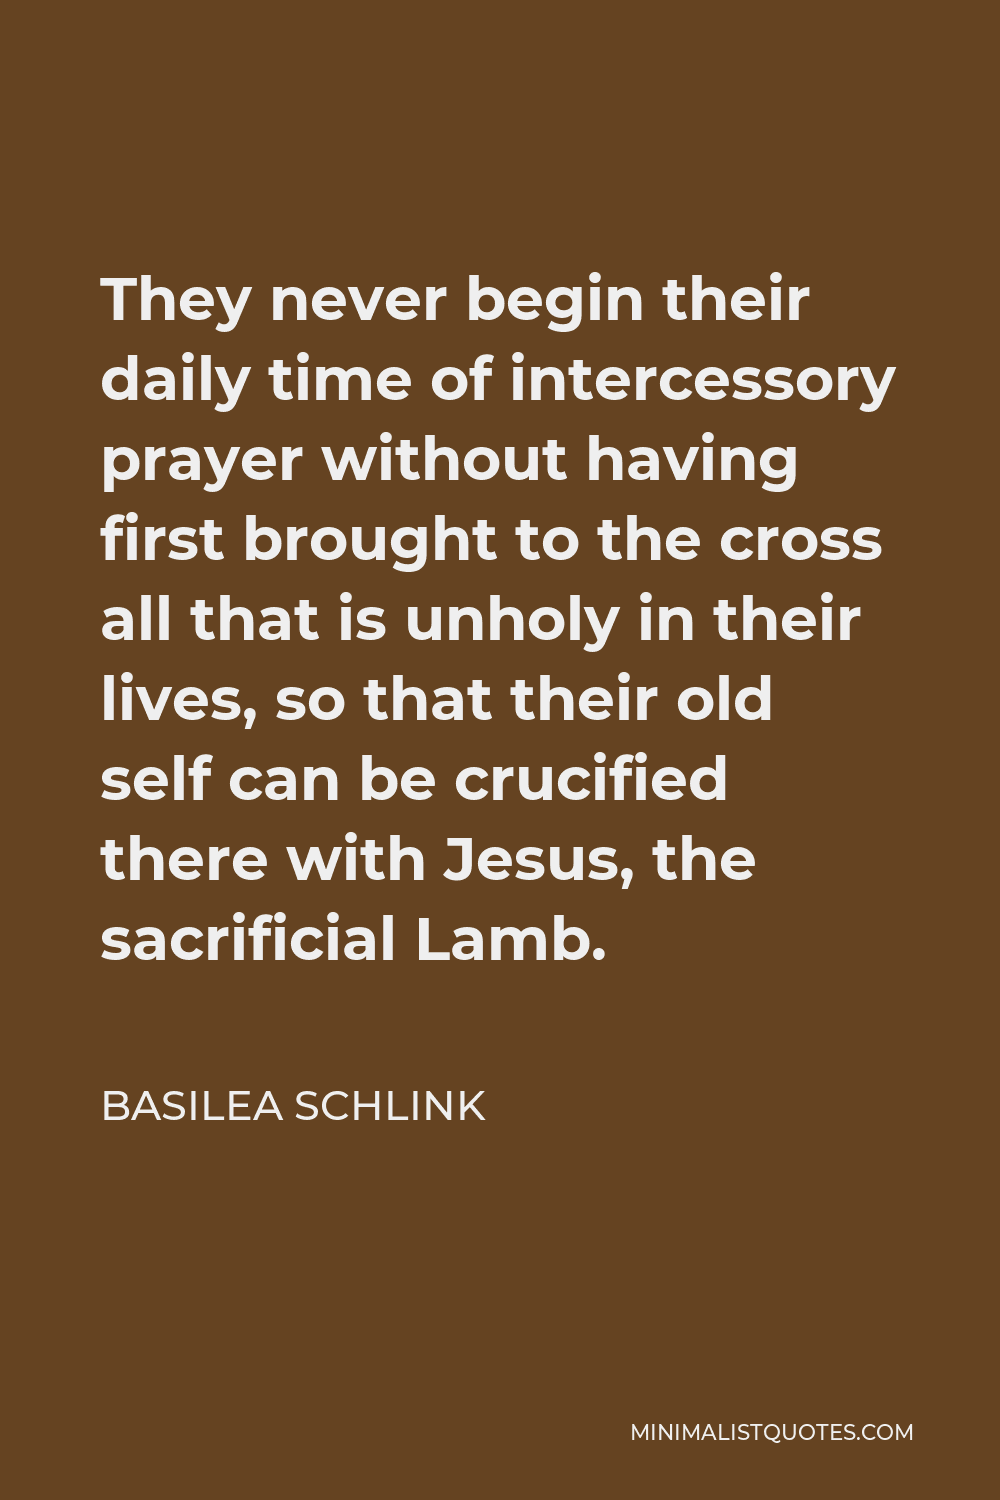 Basilea Schlink Quote - They never begin their daily time of intercessory prayer without having first brought to the cross all that is unholy in their lives, so that their old self can be crucified there with Jesus, the sacrificial Lamb.